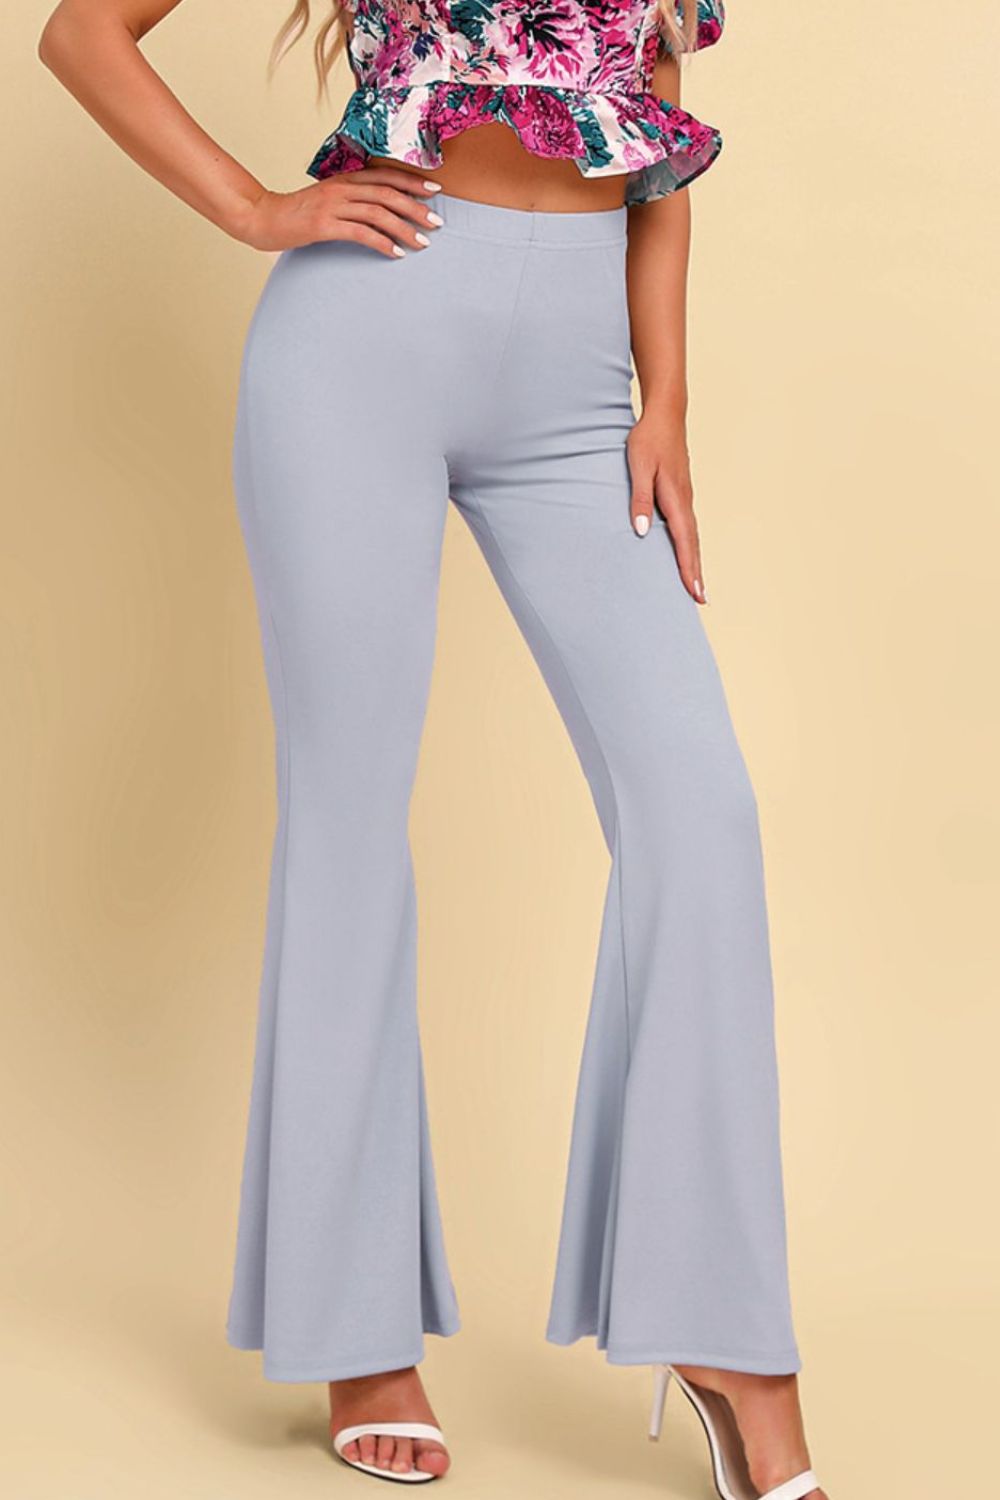 Pull On Flared Pants - nailedmoms